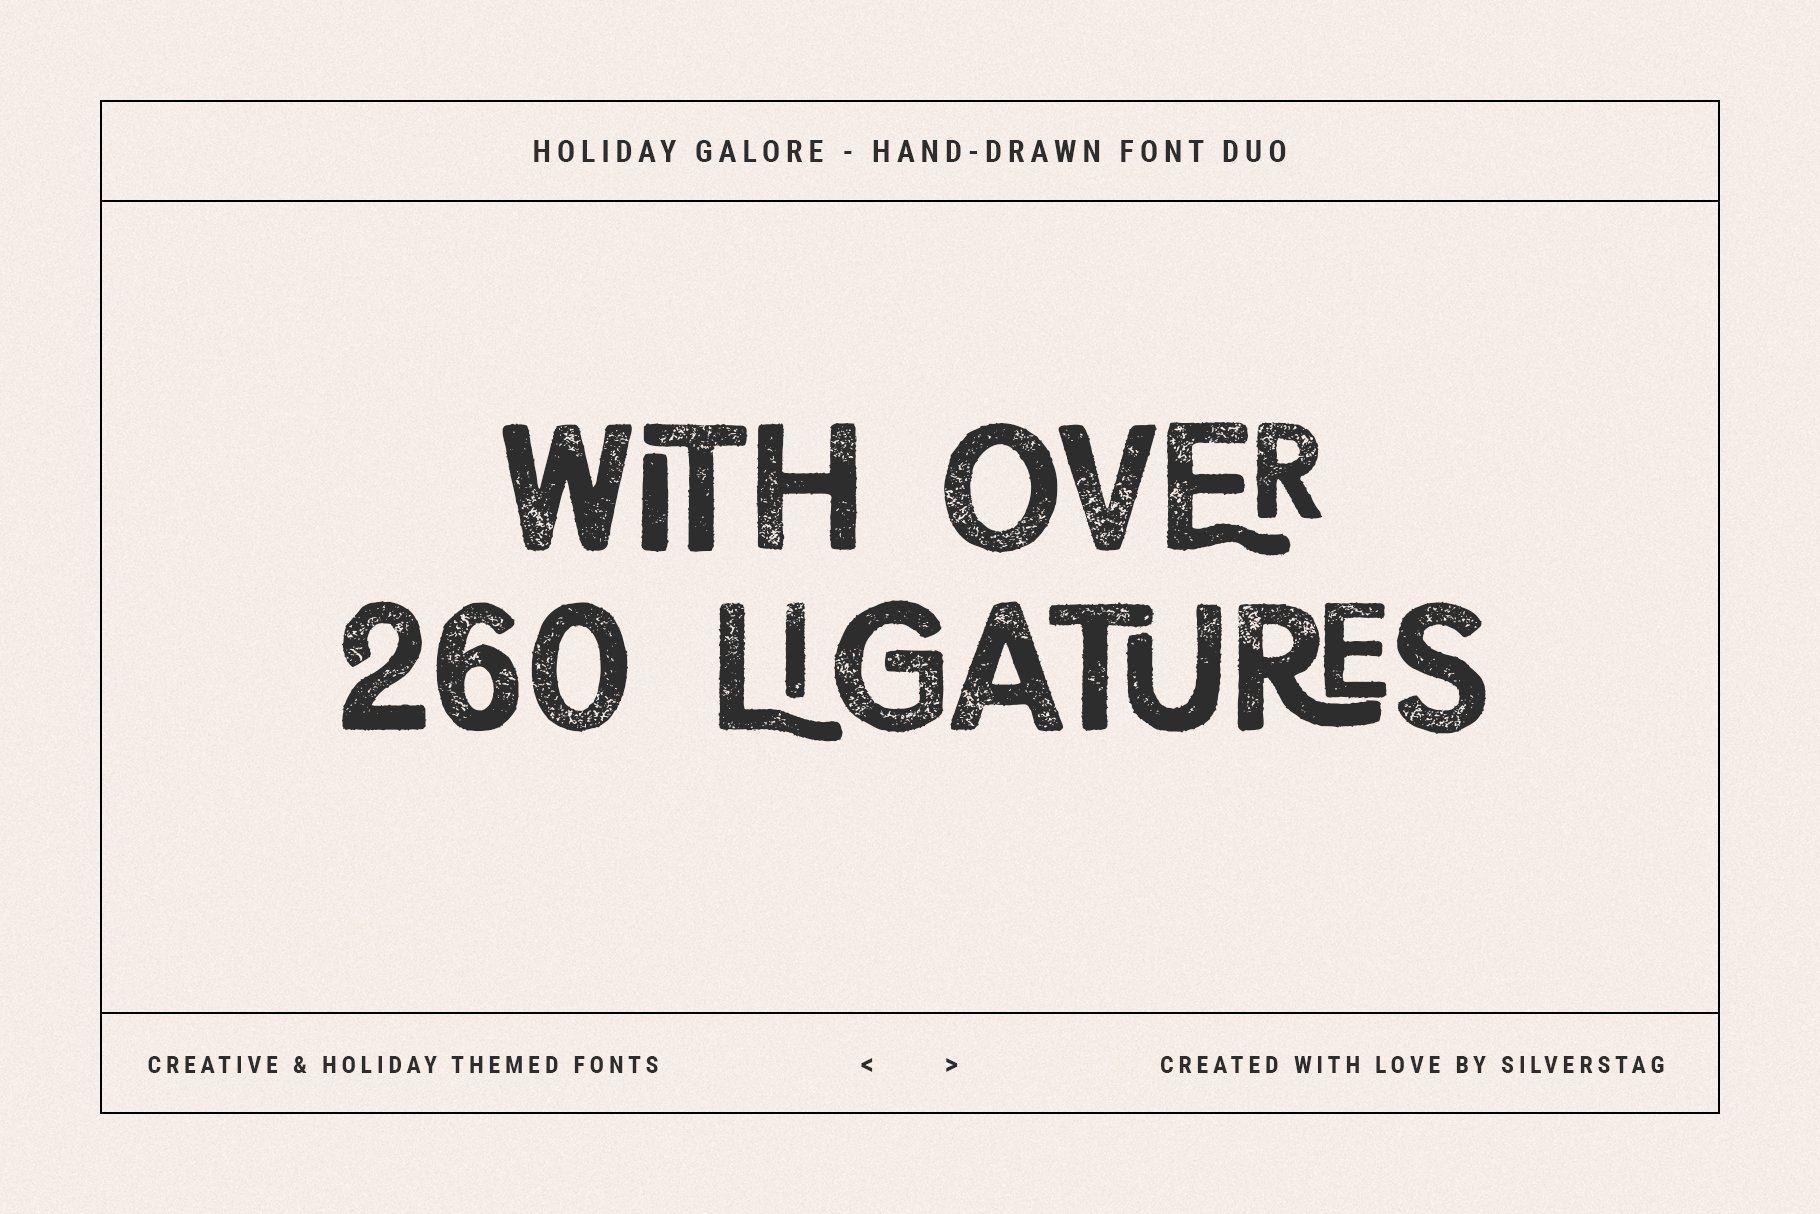 33 holiday galore font duo by silver stag 990